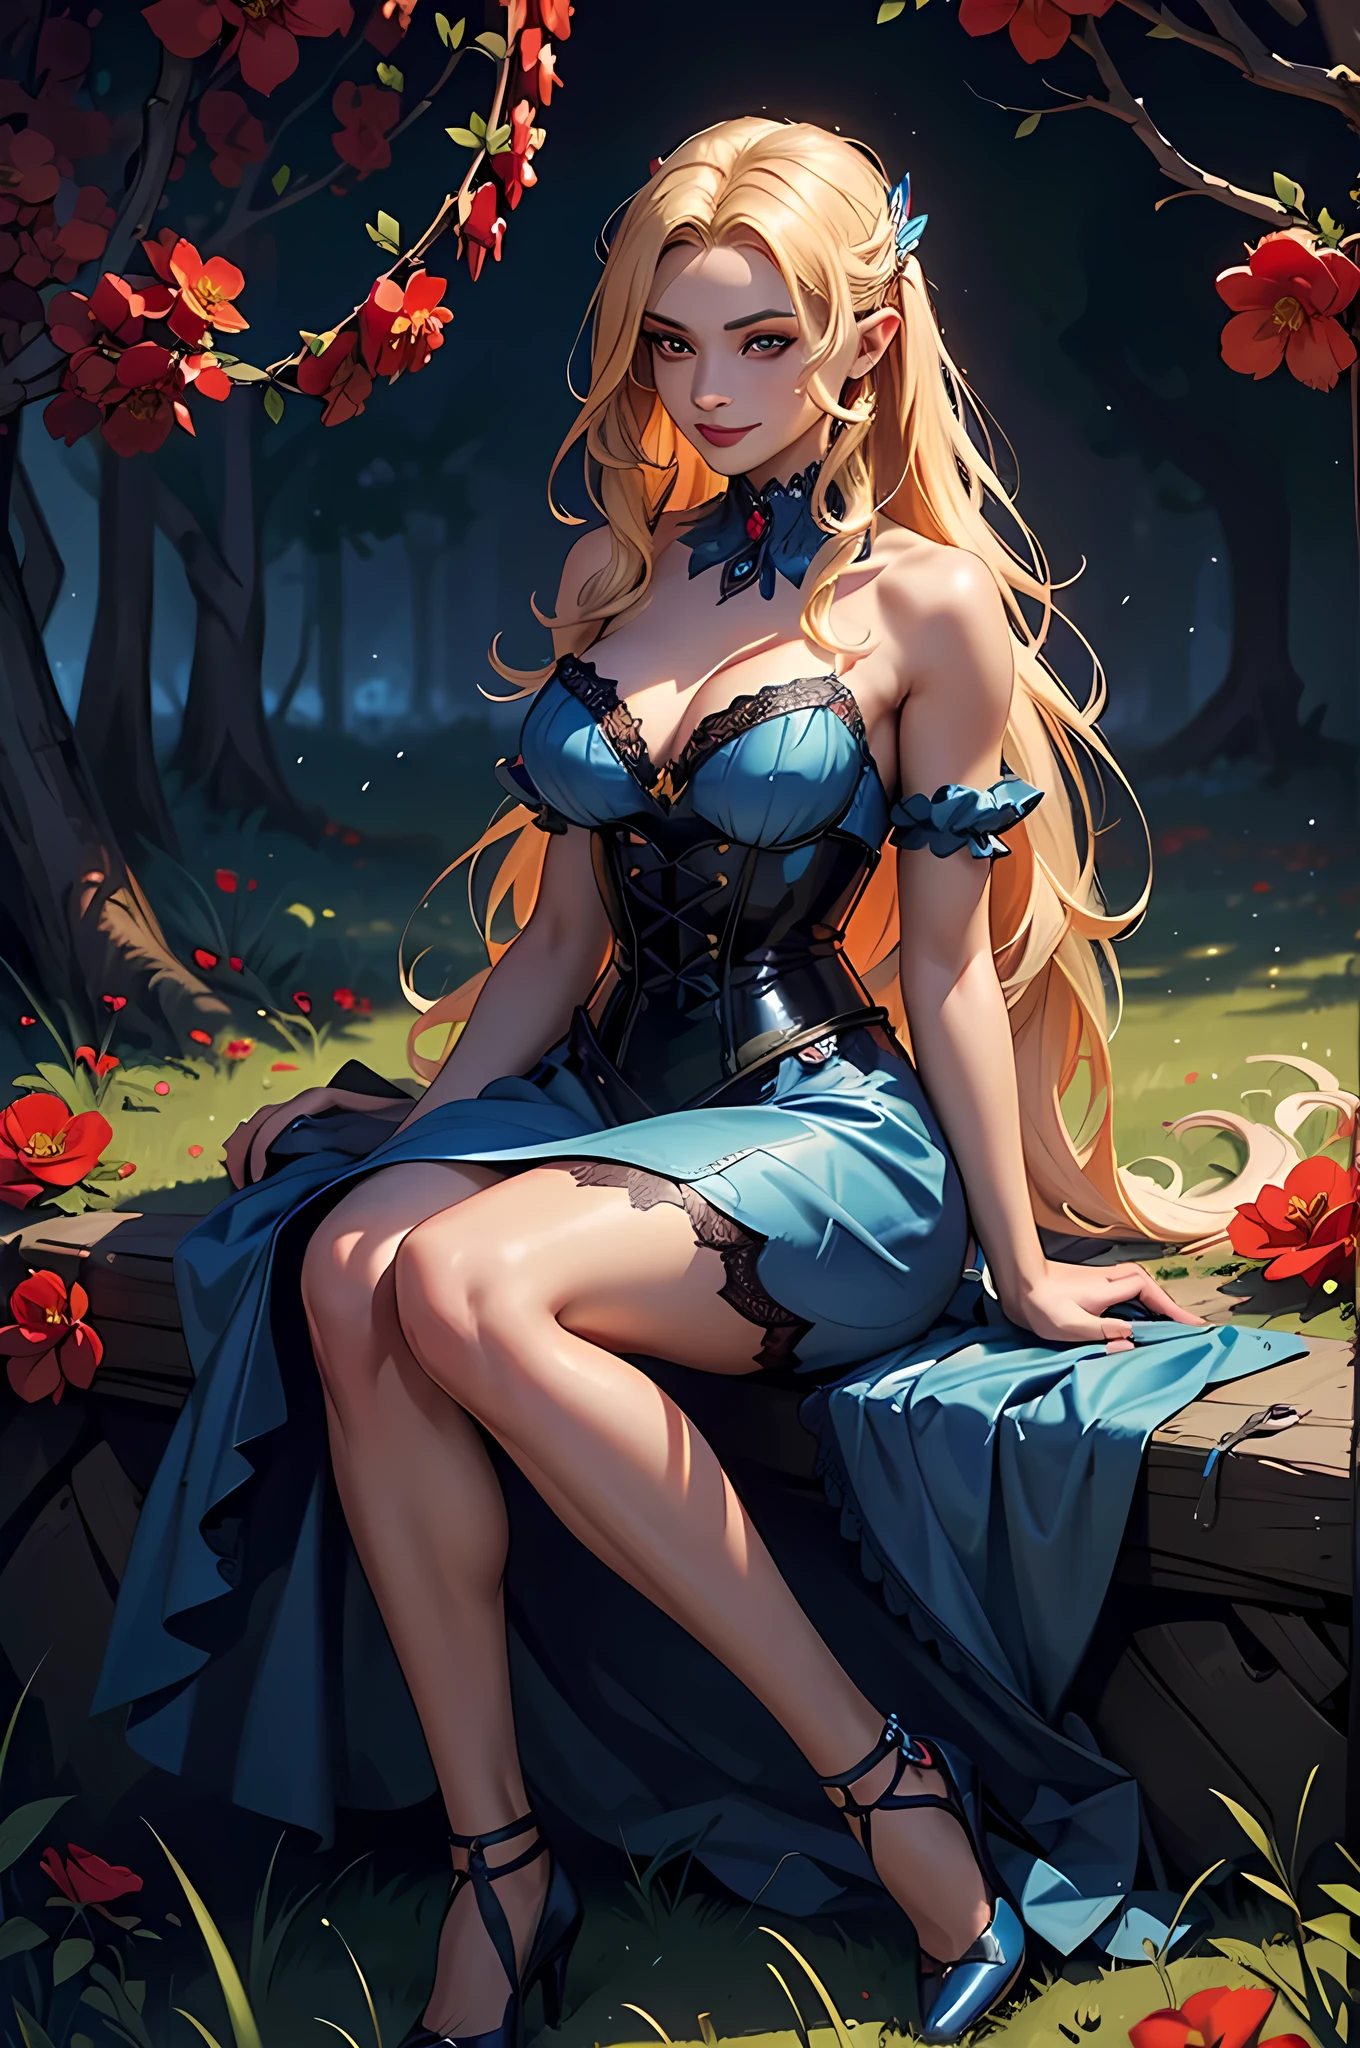 high details, best quality, 16k, RAW, [best detailed], masterpiece, best quality, (extremely detailed), full body, ultra wide shot, photorealistic, dark fantasy art, goth art, RPG art, D&D art, a picture of a dark female fairy resting in a flower meadow, extremely beautiful fairy, ultra feminine (intense details, Masterpiece, best quality), best detailed face (intense details, Masterpiece, best quality), having wide butterfly wings, spread butterfly wings (intense details, Masterpiece, best quality), (blue: 1.5)  colors wings (intense details, Masterpiece, best quality), (blond) hair, long hair, shinning hair, flowing hair, shy smile, innocent smile, (red: 1.3) eyes, dark blue lips, wearing [azure] dress latex corset (intense details, Masterpiece, best quality), dynamic elegant shirt, chocker, wearing (blue: 1.3) high heels, in various shades of red colored flower meadow (intense details, Masterpiece, best quality), (red flowers: 1.2) , (black flowers: 1.2), (white flowers: 1.2), (blue flowers: 1.3) [extreme many flowers] (intense details, Masterpiece, best quality), dark colorful flowers (intense details, Masterpiece, best quality), flower meadow in a dark goth field background, dim light, cinematic light, High Detail, Ultra High Quality, High Resolution, 16K Resolution, Ultra HD Pictures, 3D rendering Ultra Realistic, Clear Details, Realistic Detail, Ultra High Definition, #chinese cloth,